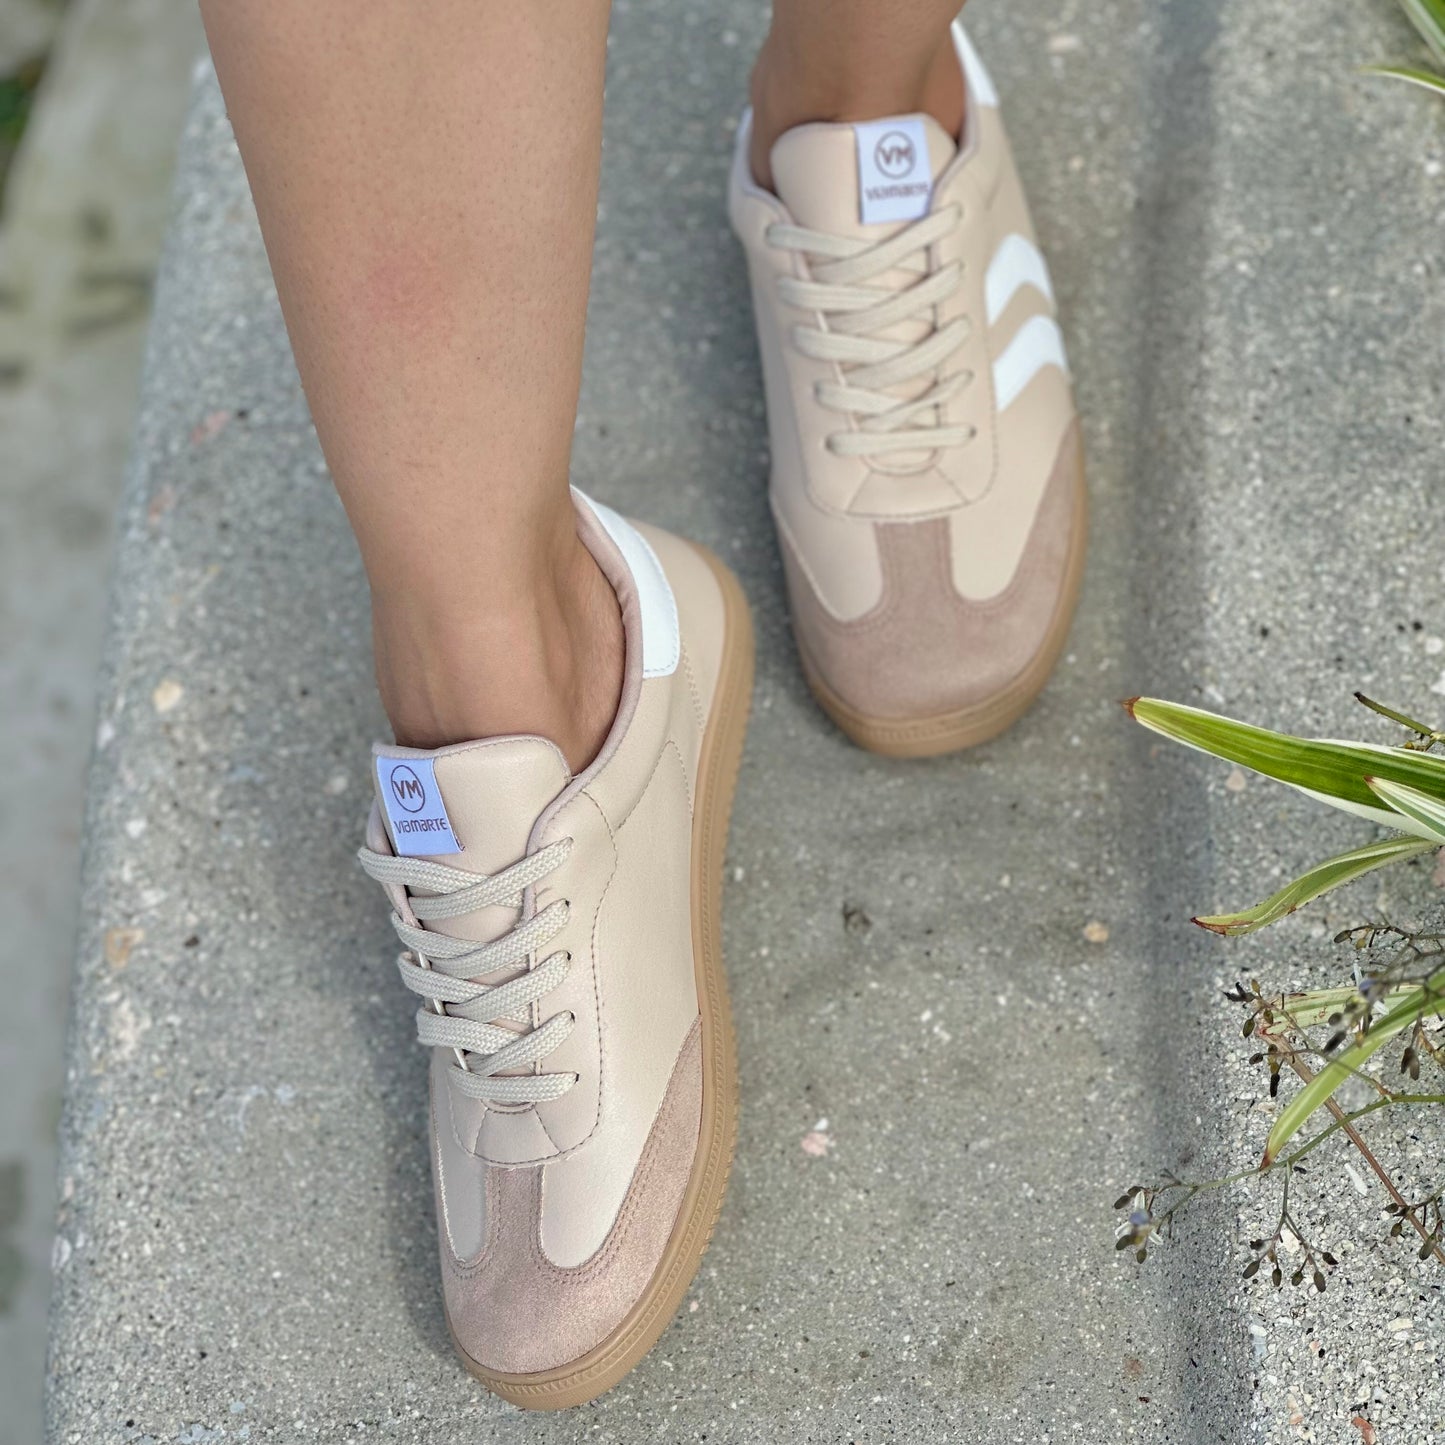 Celia beige and white low sneaker